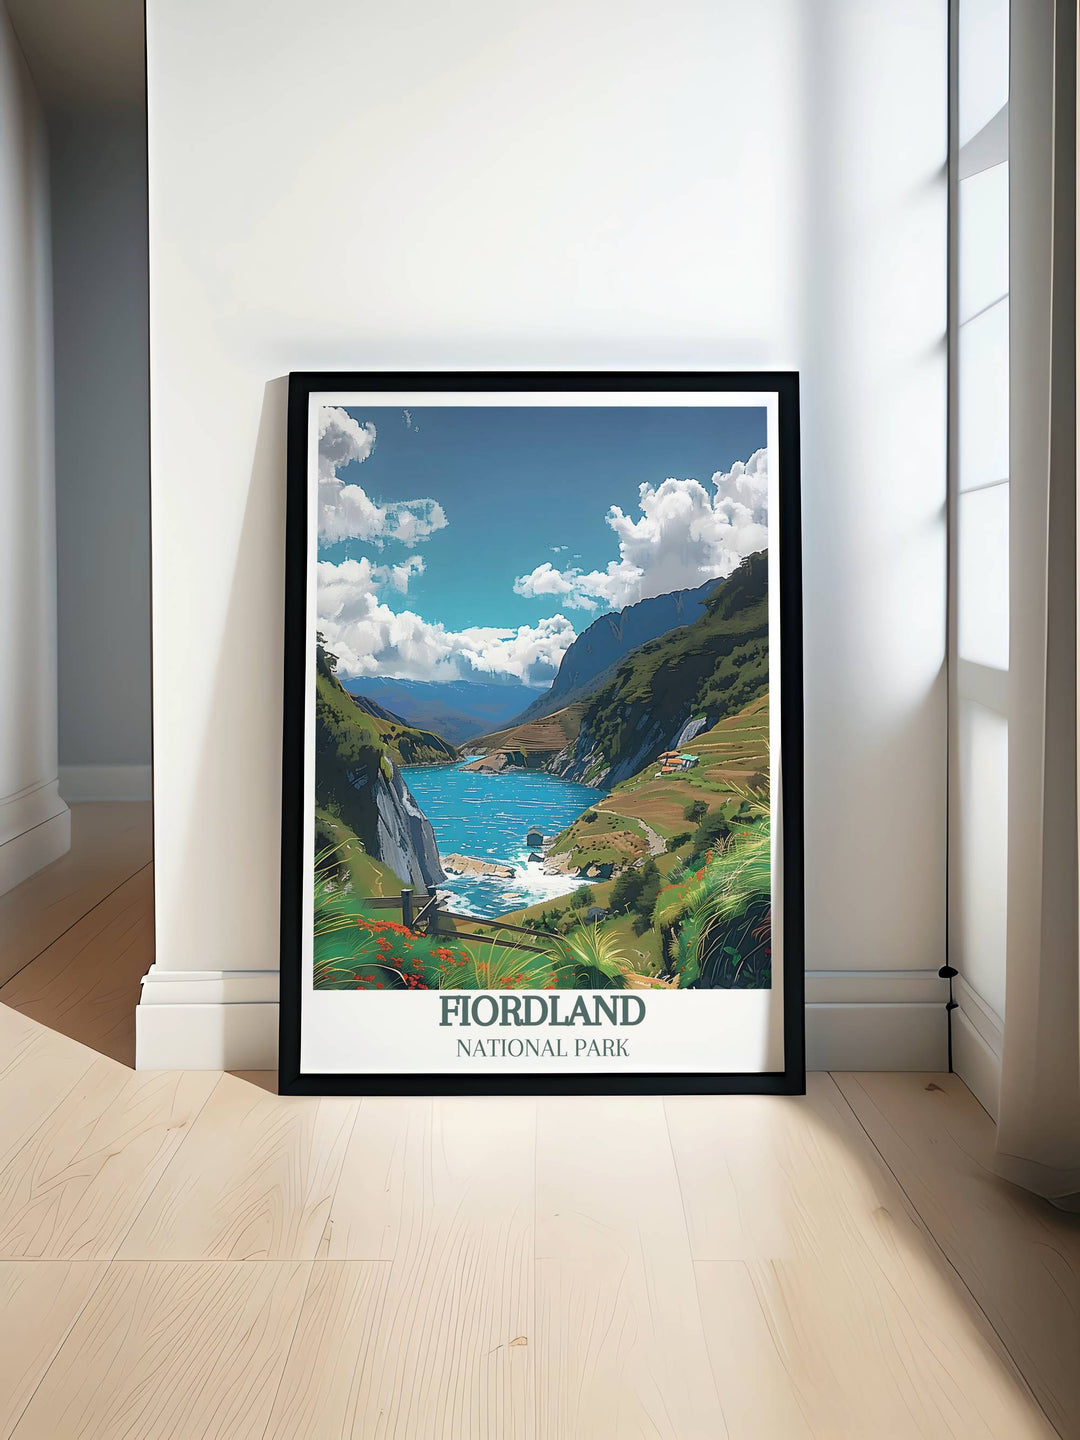 Panoramic view of The Routeburn Track showing the path winding through lush forests with towering mountains in the background, captured in an exquisite fine art print.